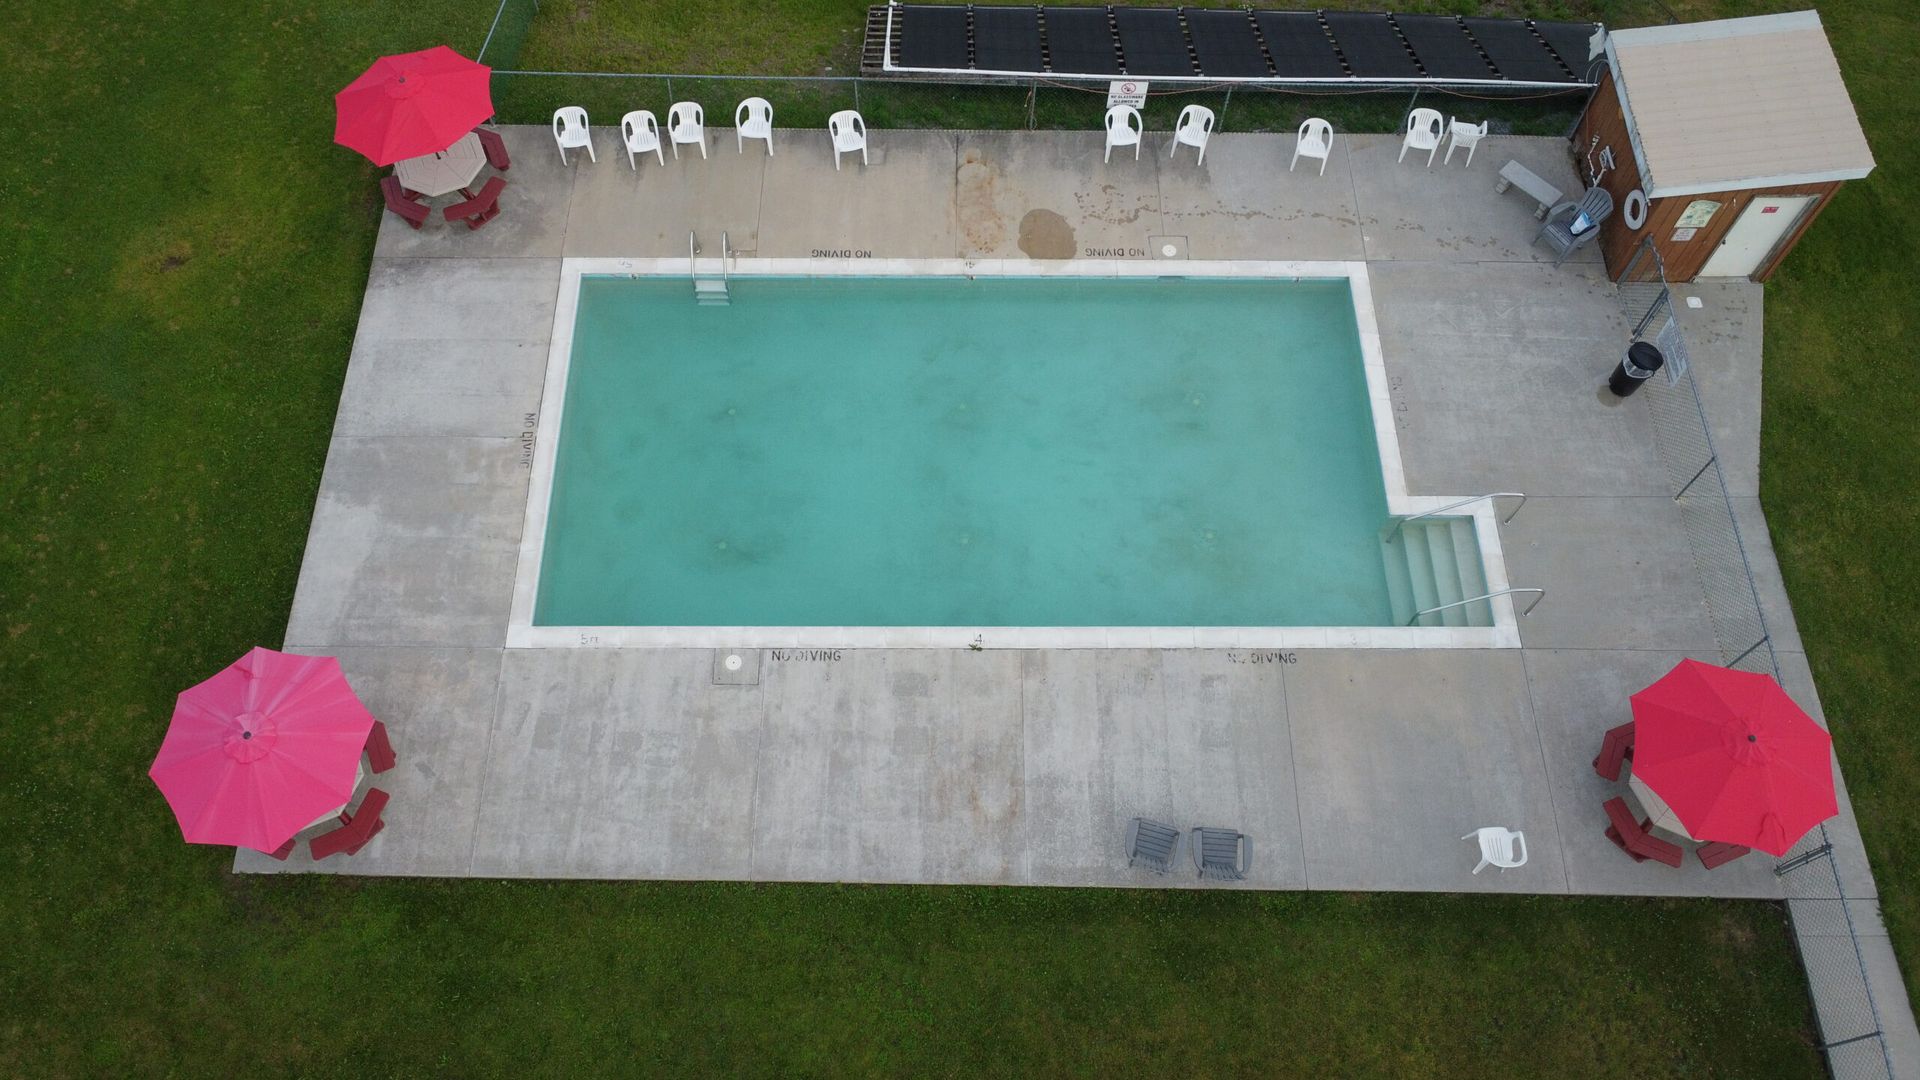 An aerial view of a swimming pool with red umbrellas and chairs.